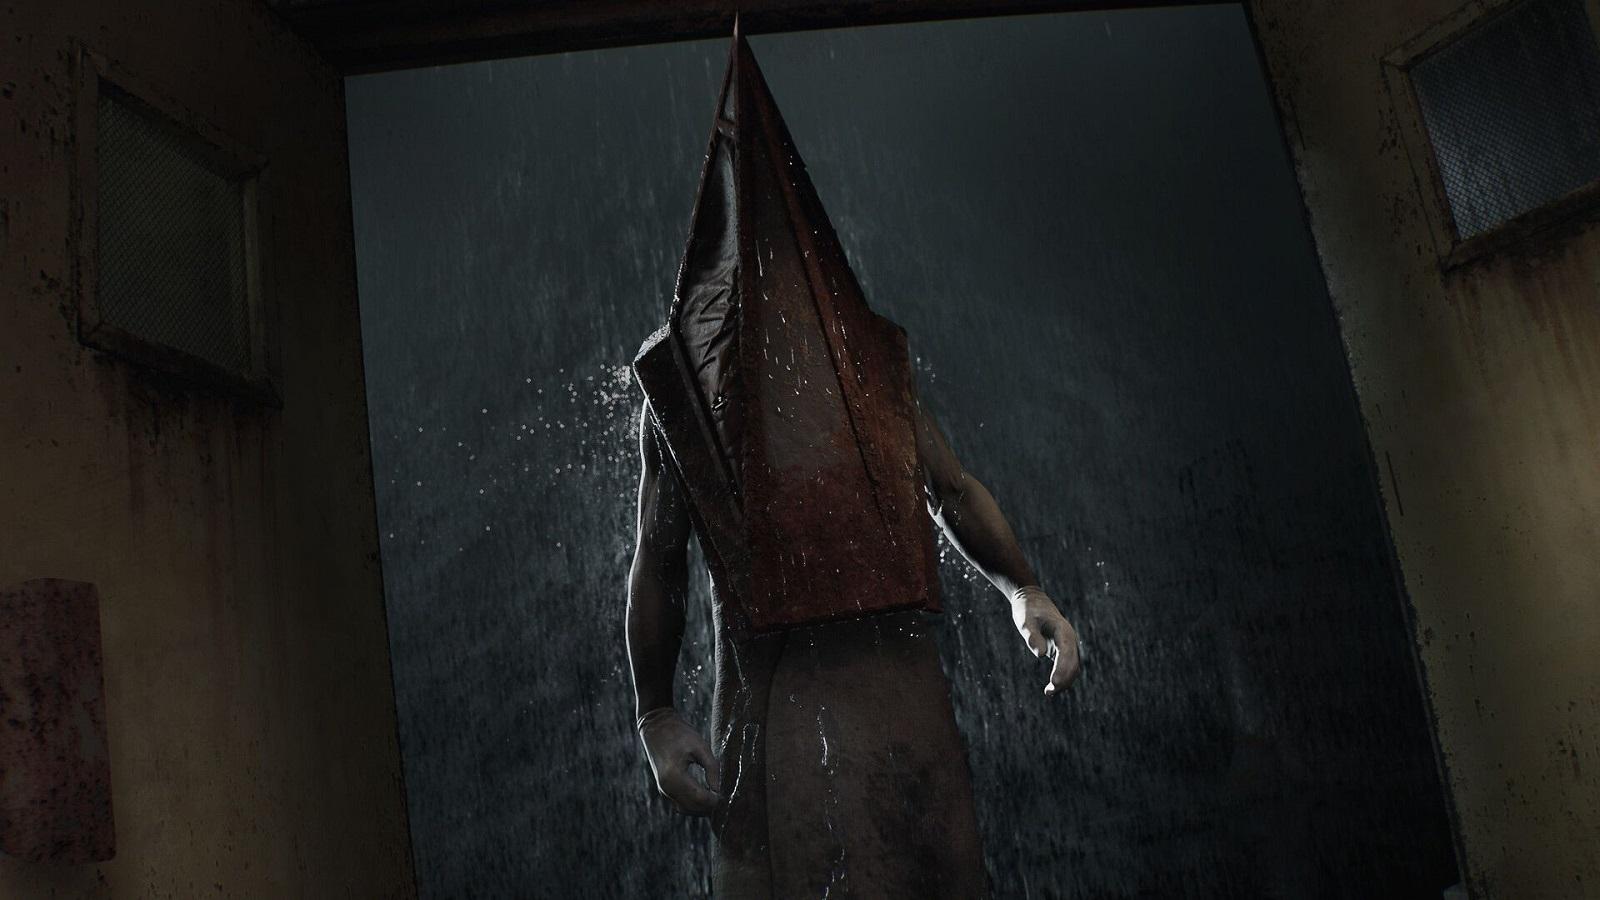 Silent Hill Upcoming Game Screen Leaked - Masahiro Ito Pyramid Head  Designer & Sony Playstation Involved? + Evil Dead The Game Launch Day! -  LeaksByDaylight